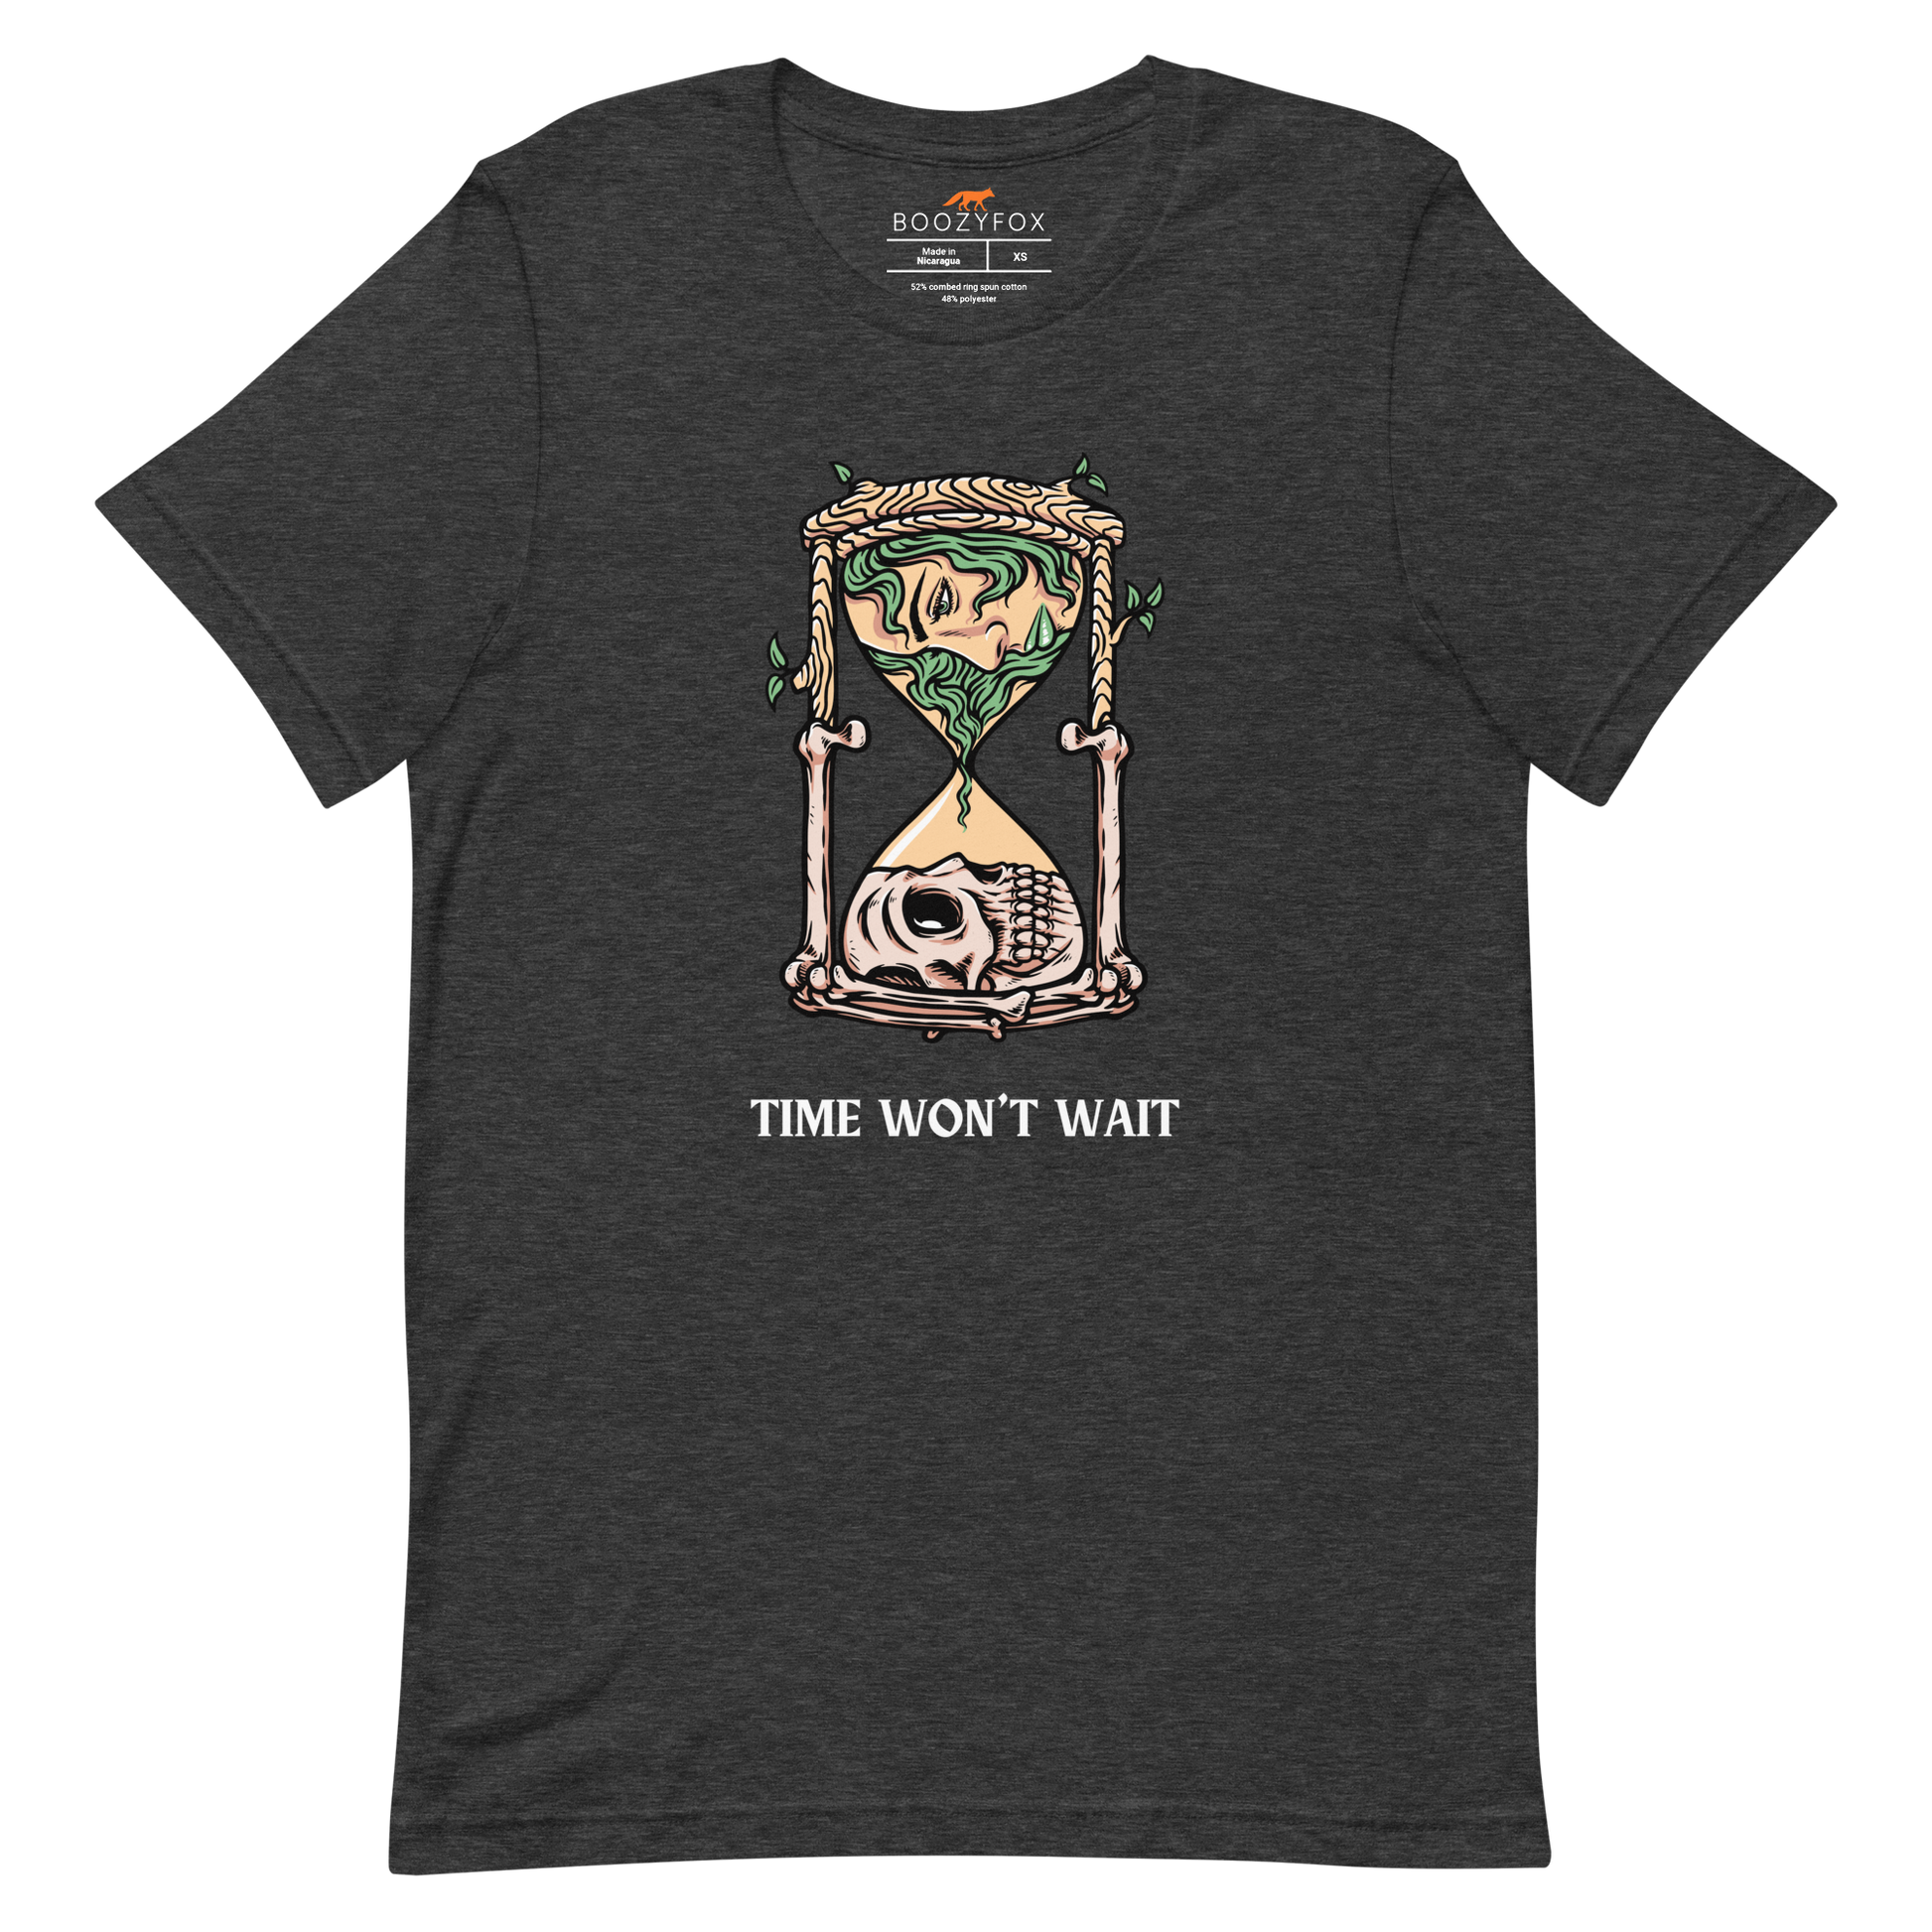 Dark Grey Heather Premium Hourglass Tee featuring a captivating Time Won't Wait graphic on the chest - Cool Graphic Hourglass Tees - Boozy Fox